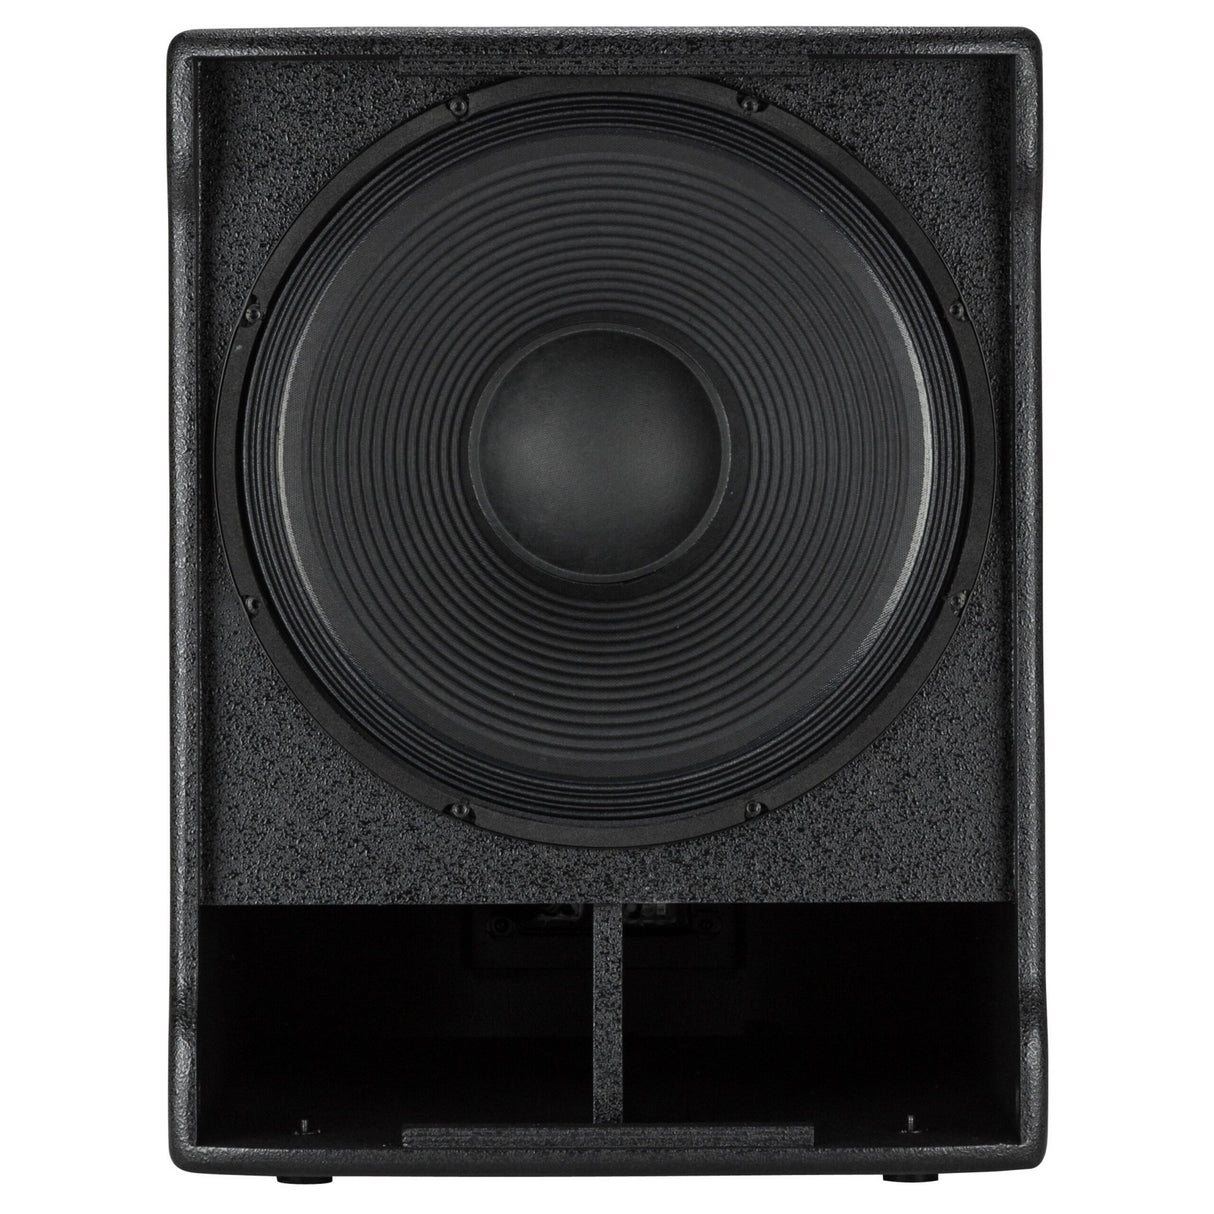 RCF SUB-705AS-MK2 Active 15 Inch Powered Subwoofer